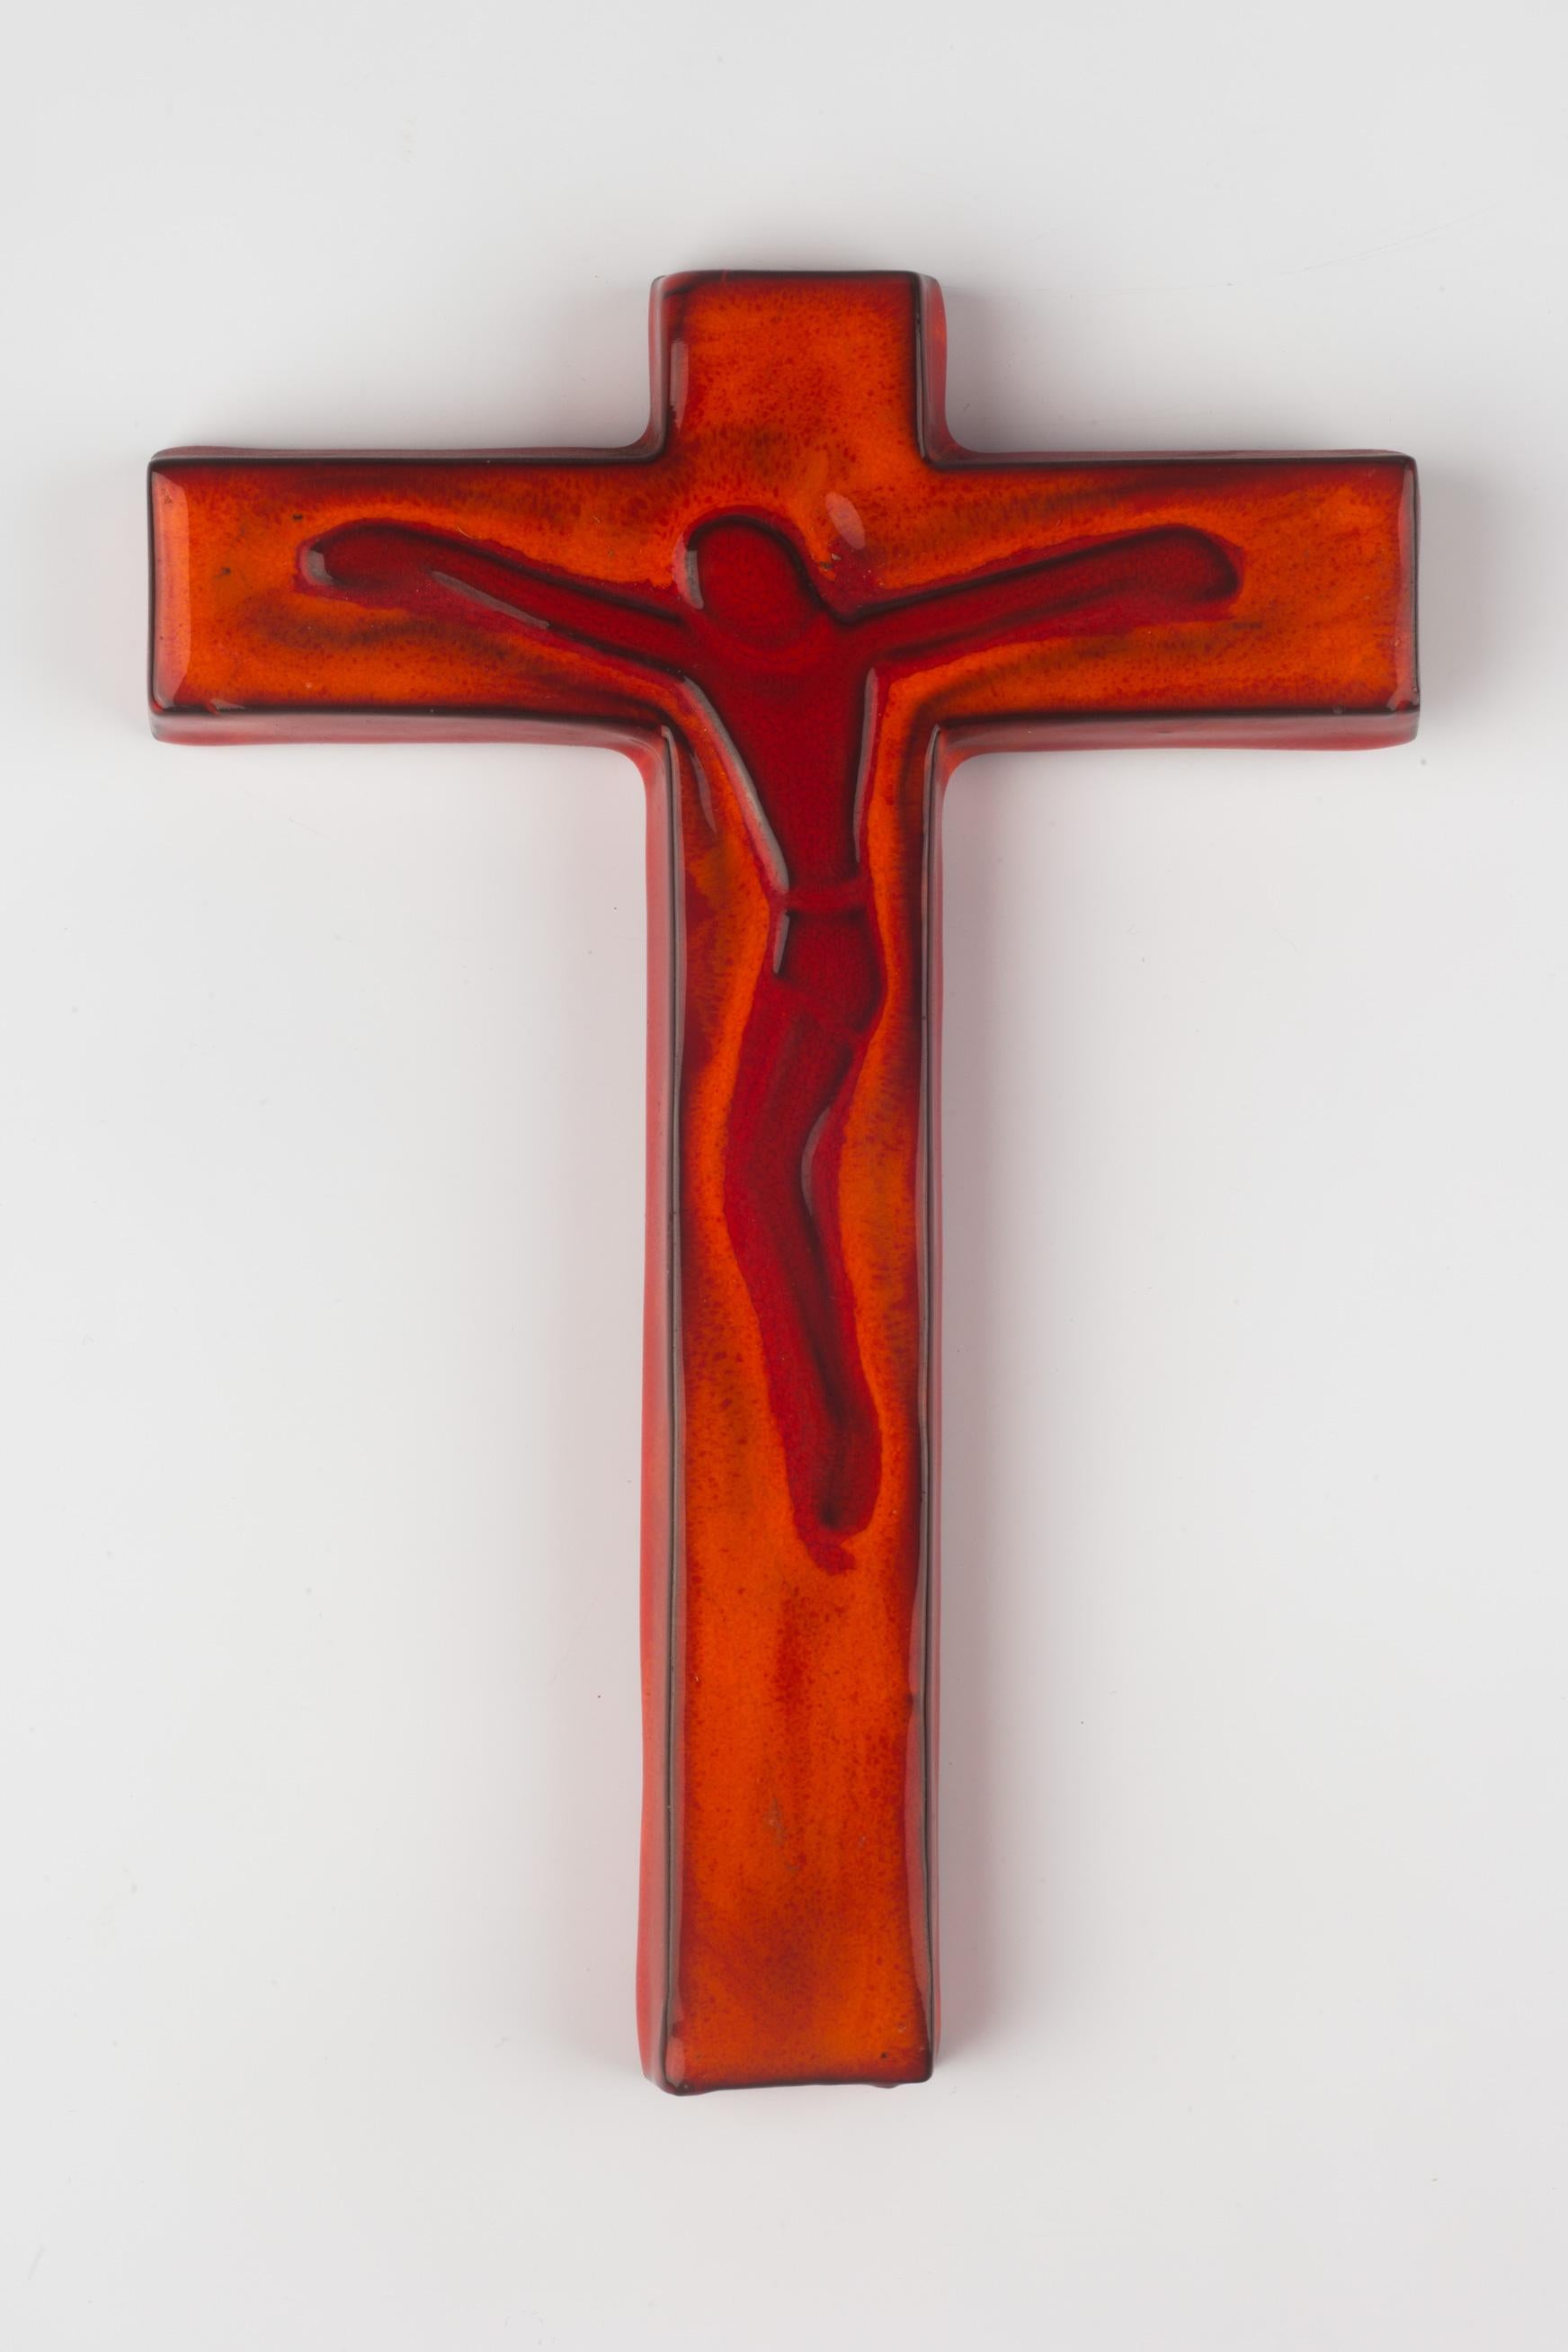 Ceramic, mid-century European crucifix. Hand-painted and glazed in bright and dark orange with black contours outlining the Christ figure and cross. The shape of the figure is surprisingly reminiscent of Keith Haring's iconic works, and with